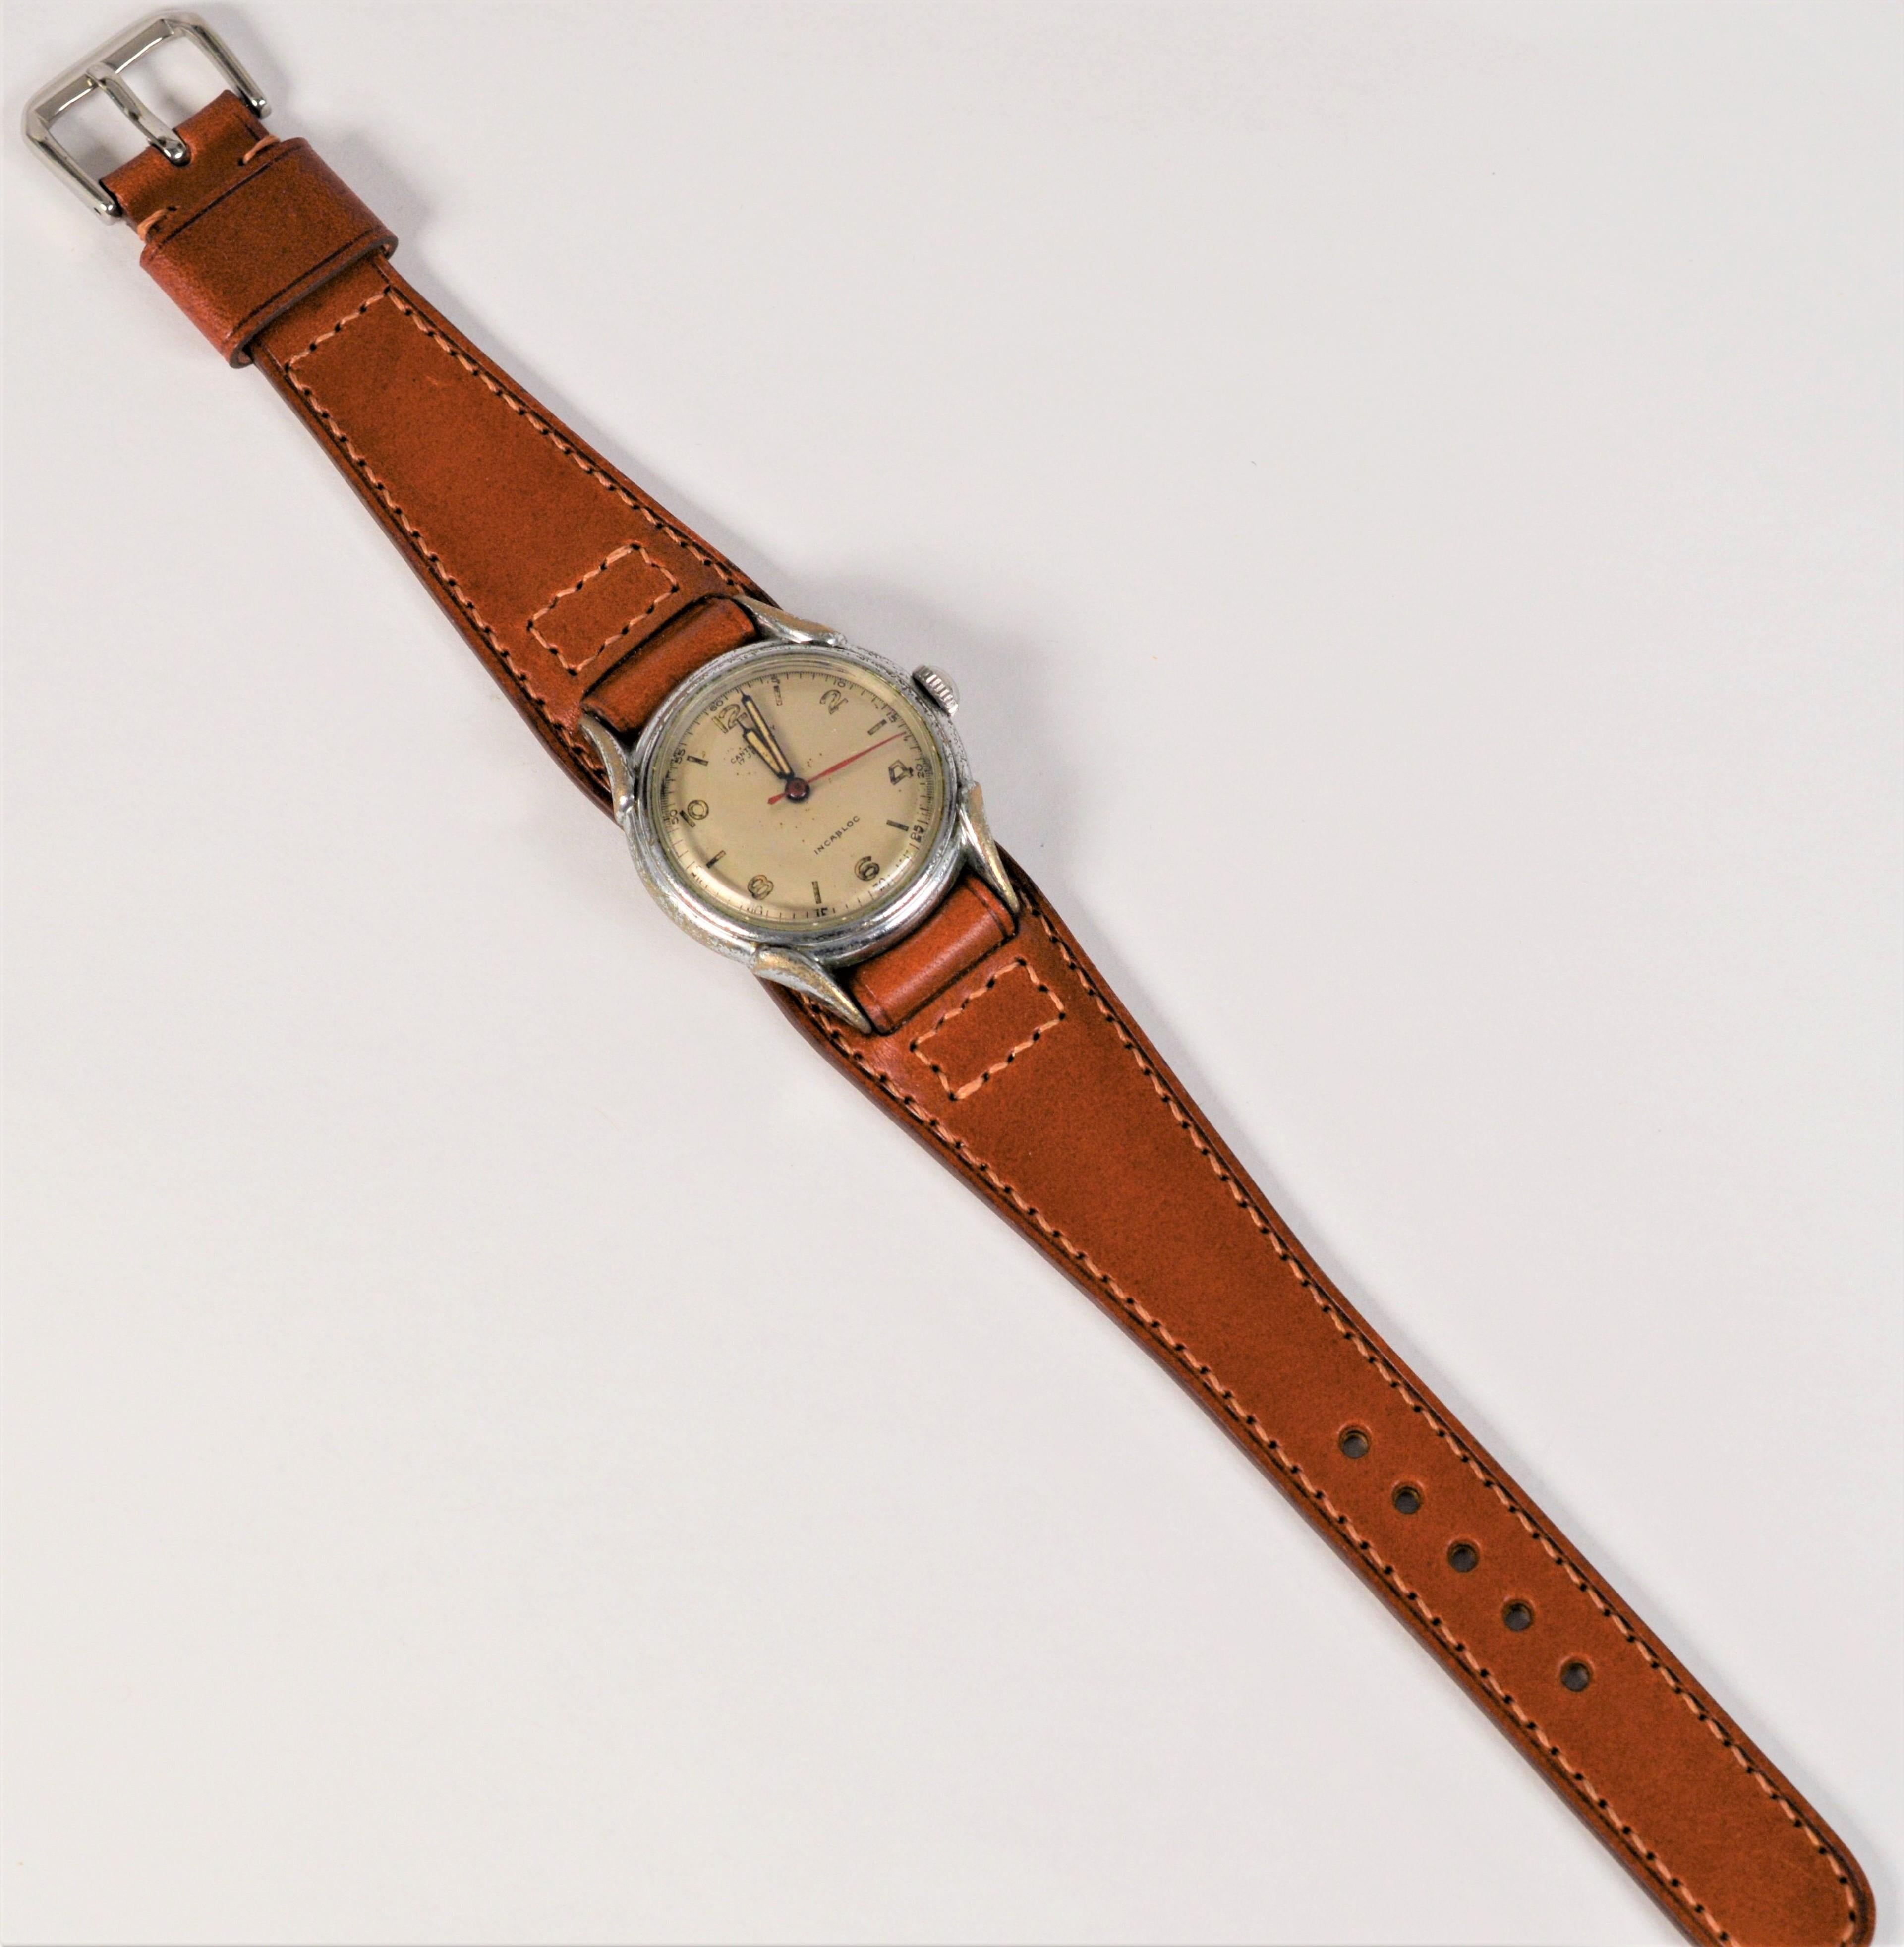 With it's case intentionally left in original condition, proudly showing signs of use from its journey thru time from the Pre-War 11 Era, this vintage American made steel 31mm Canterbury Wrist Watch presents an authentic rugged look and is perfect